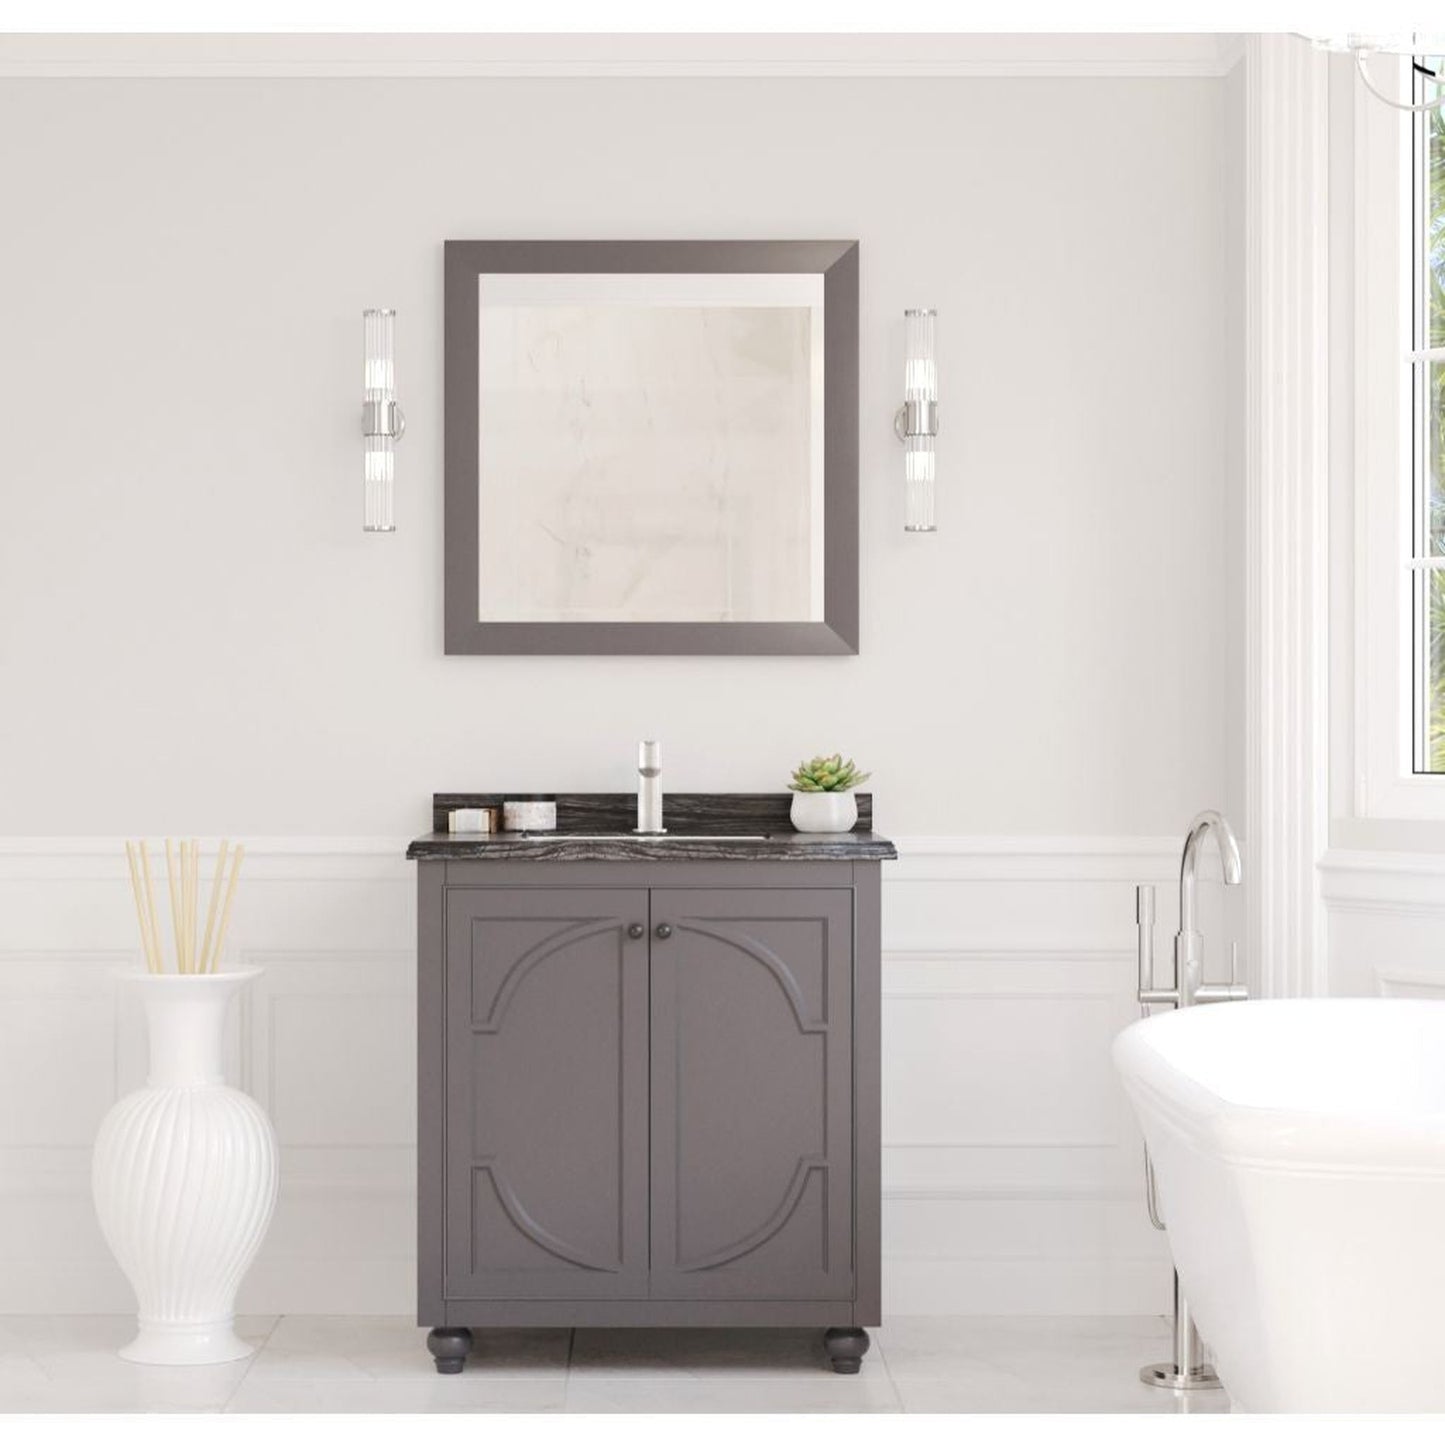 Laviva Odyssey 30" Maple Gray Vanity Base and Black Wood Marble Countertop With Rectangular Ceramic Sink